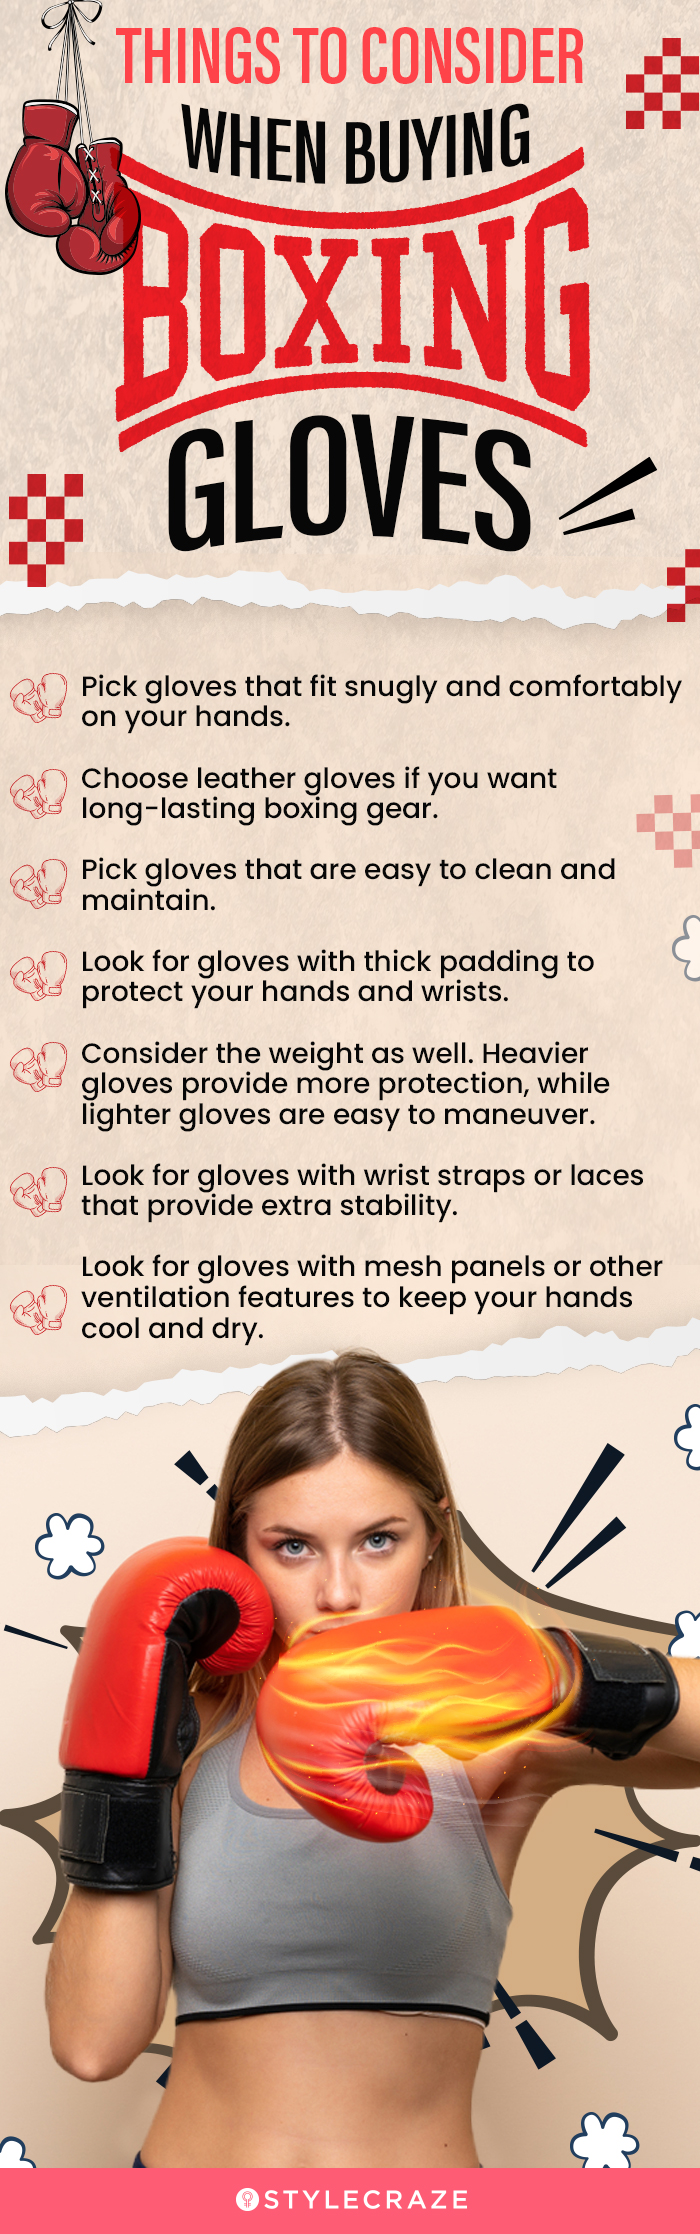 Things To Consider When Buying Boxing Gloves (infographic)